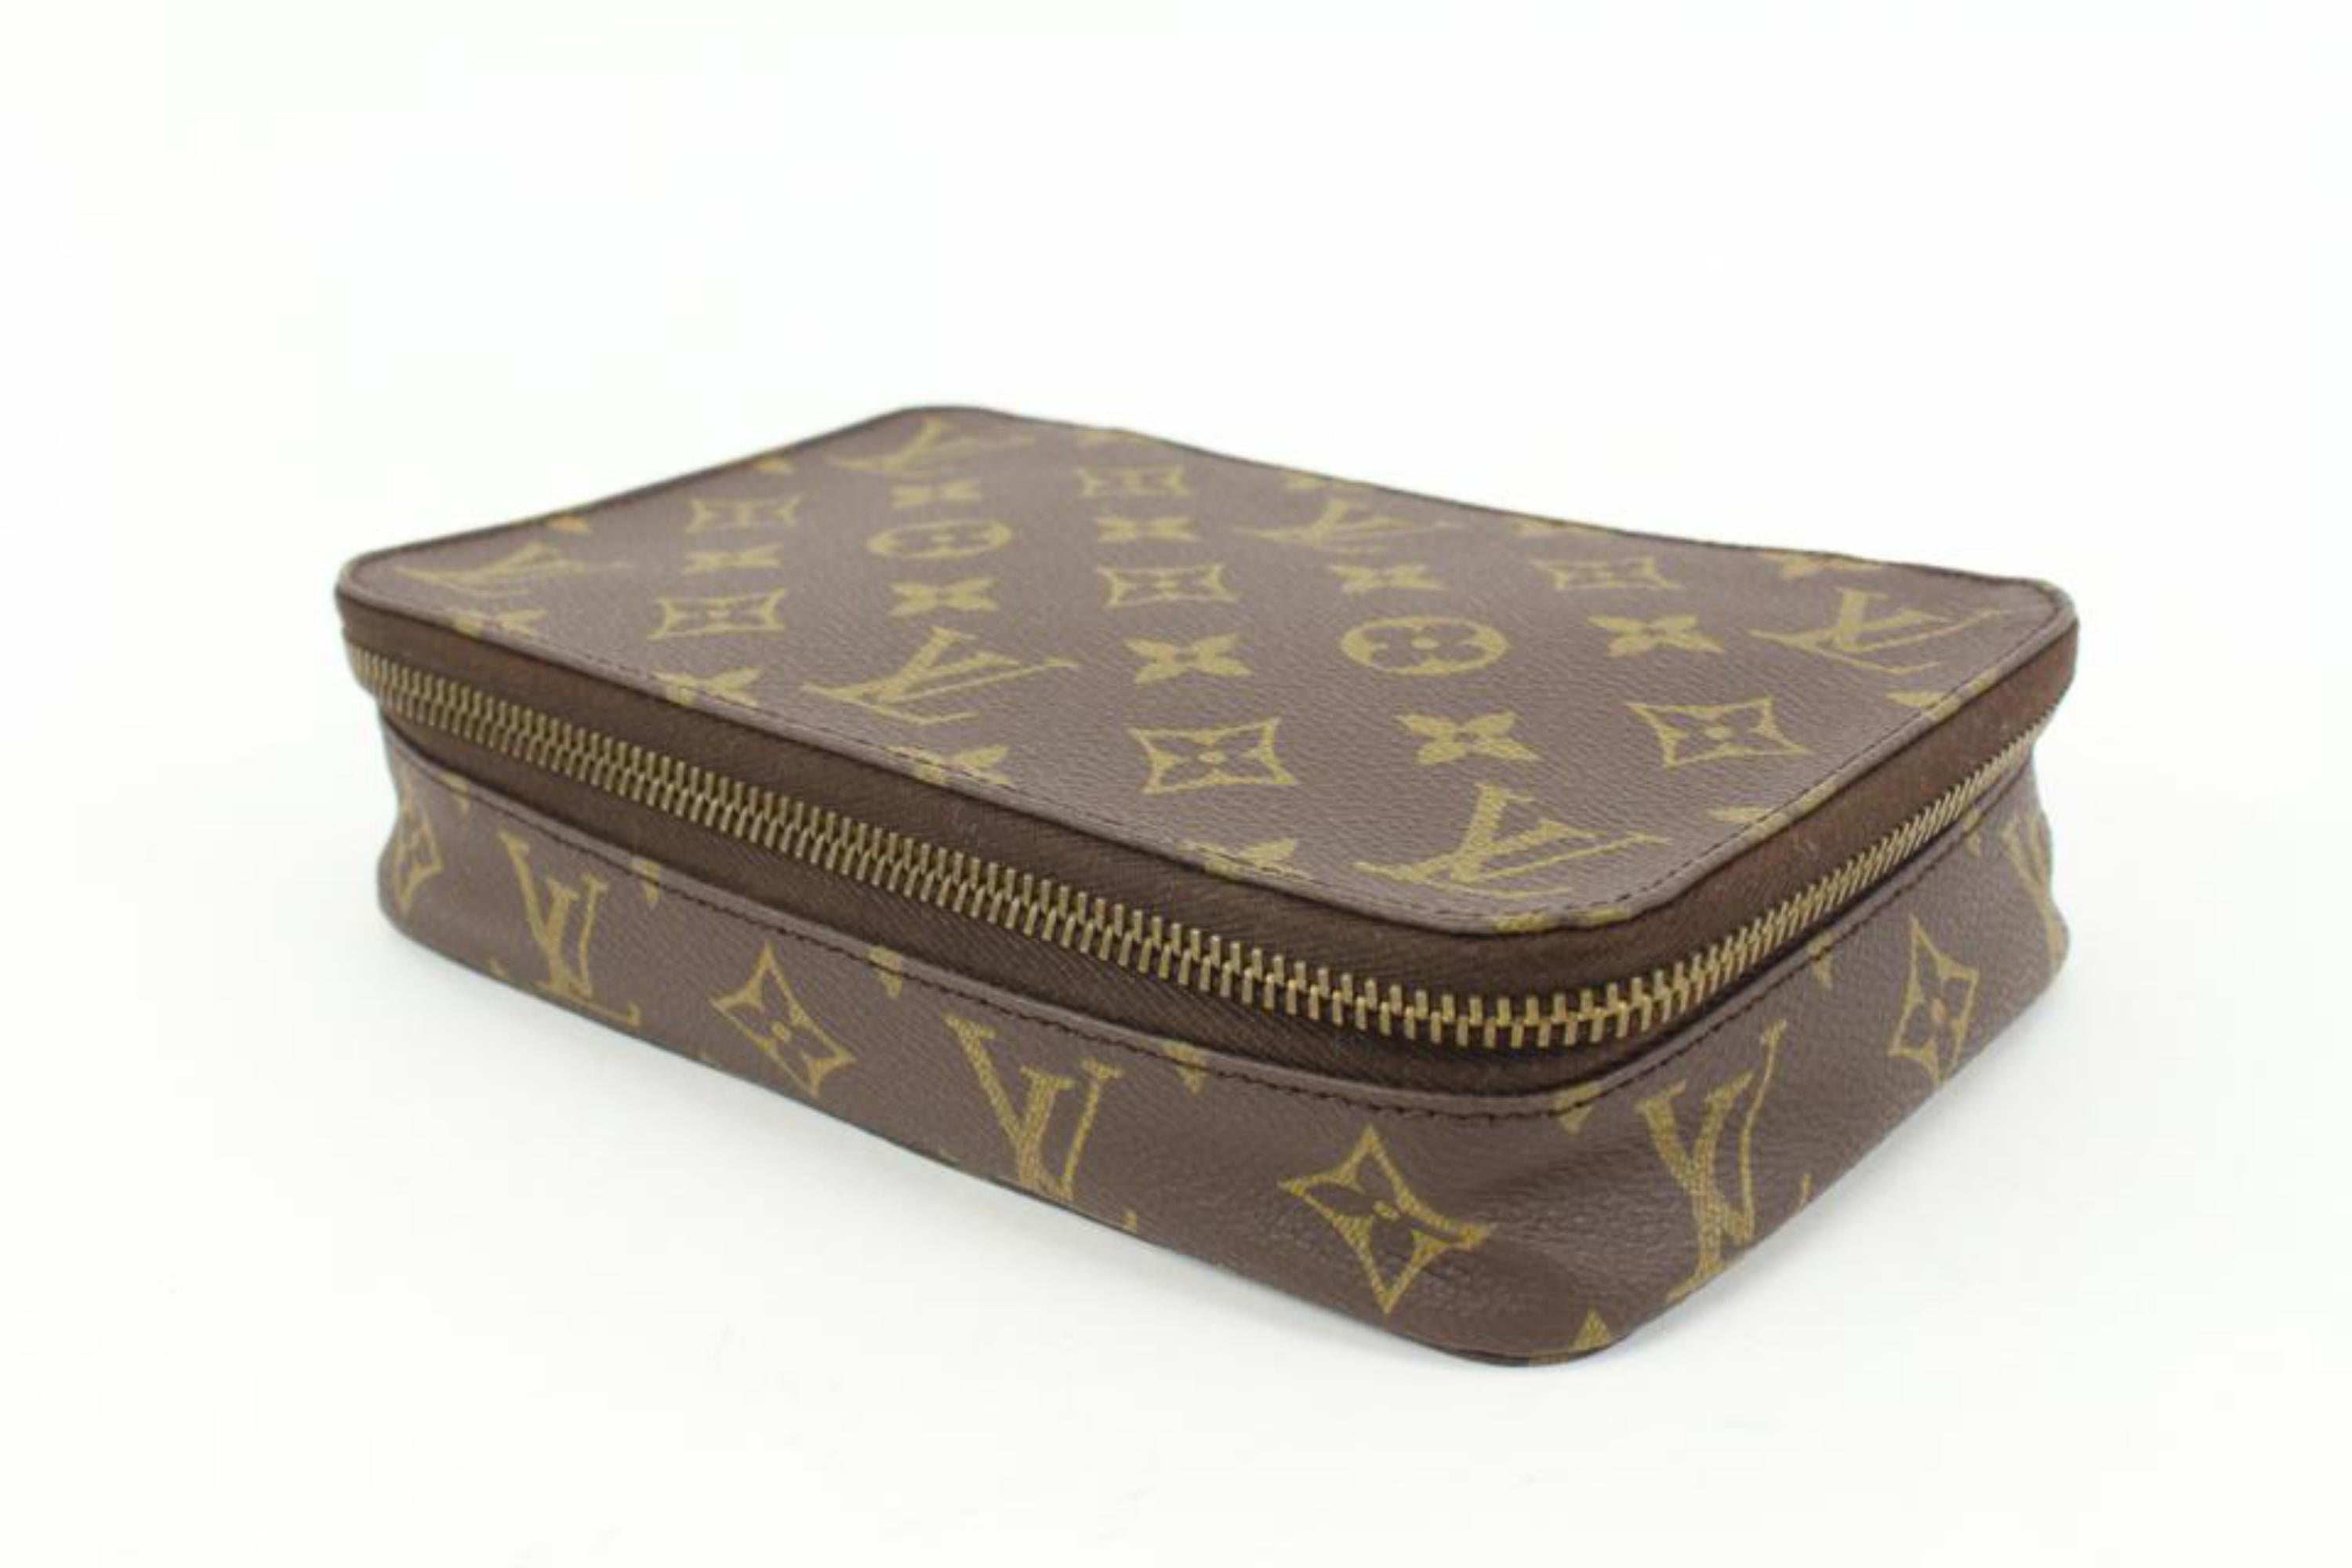 Louis Vuitton Monogram Monte Carlo Jewelry Case Boite Box 54lk38s
Date Code/Serial Number: TH1920
Made In: France
Measurements: Length:  7.75